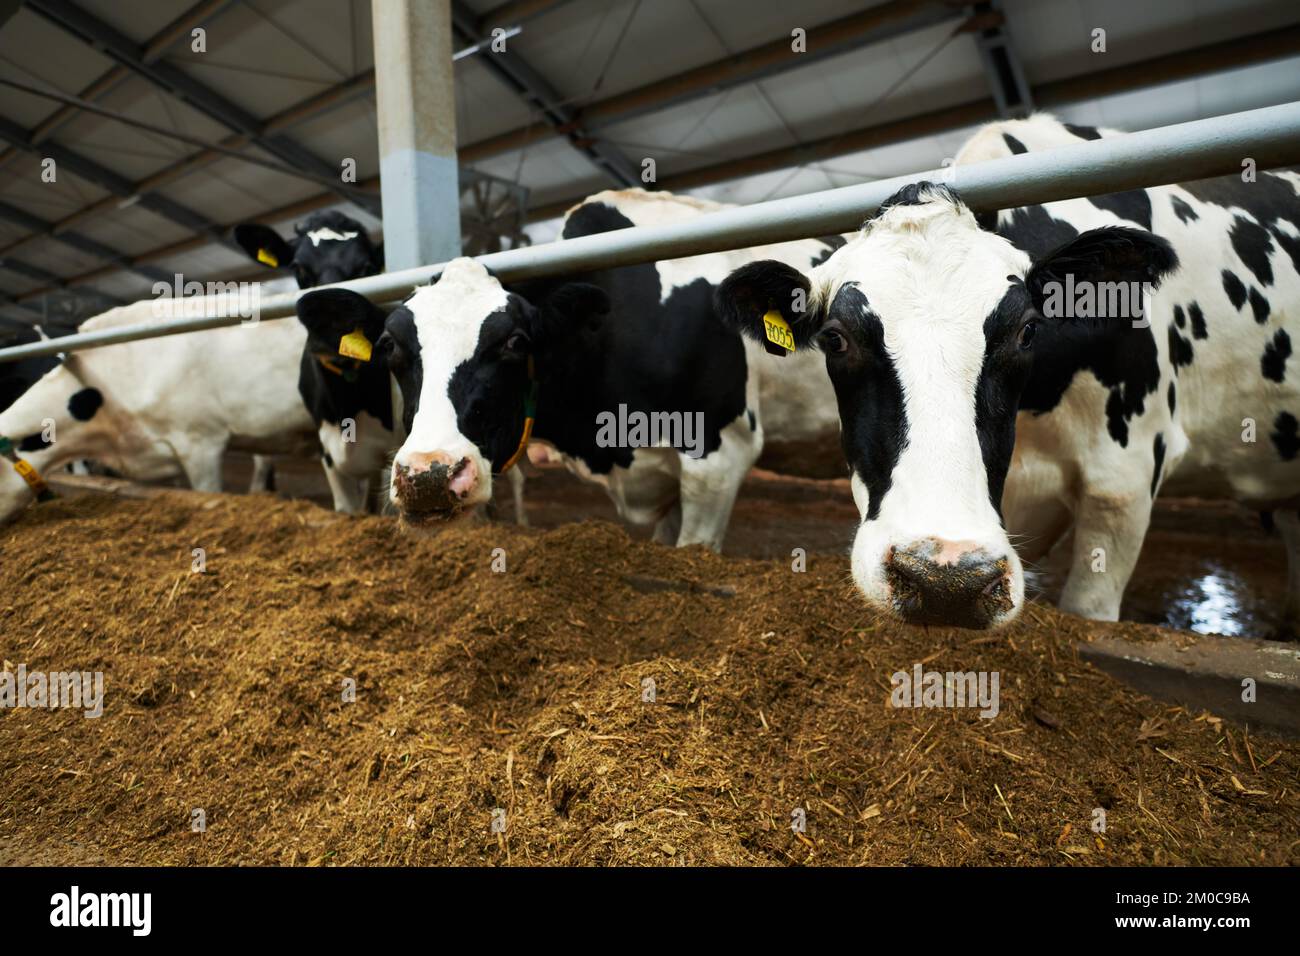 Group of black-and-white purebred dairy cows standing in cowshed in front of feeder and eating forge while one of them looking at camera Stock Photo